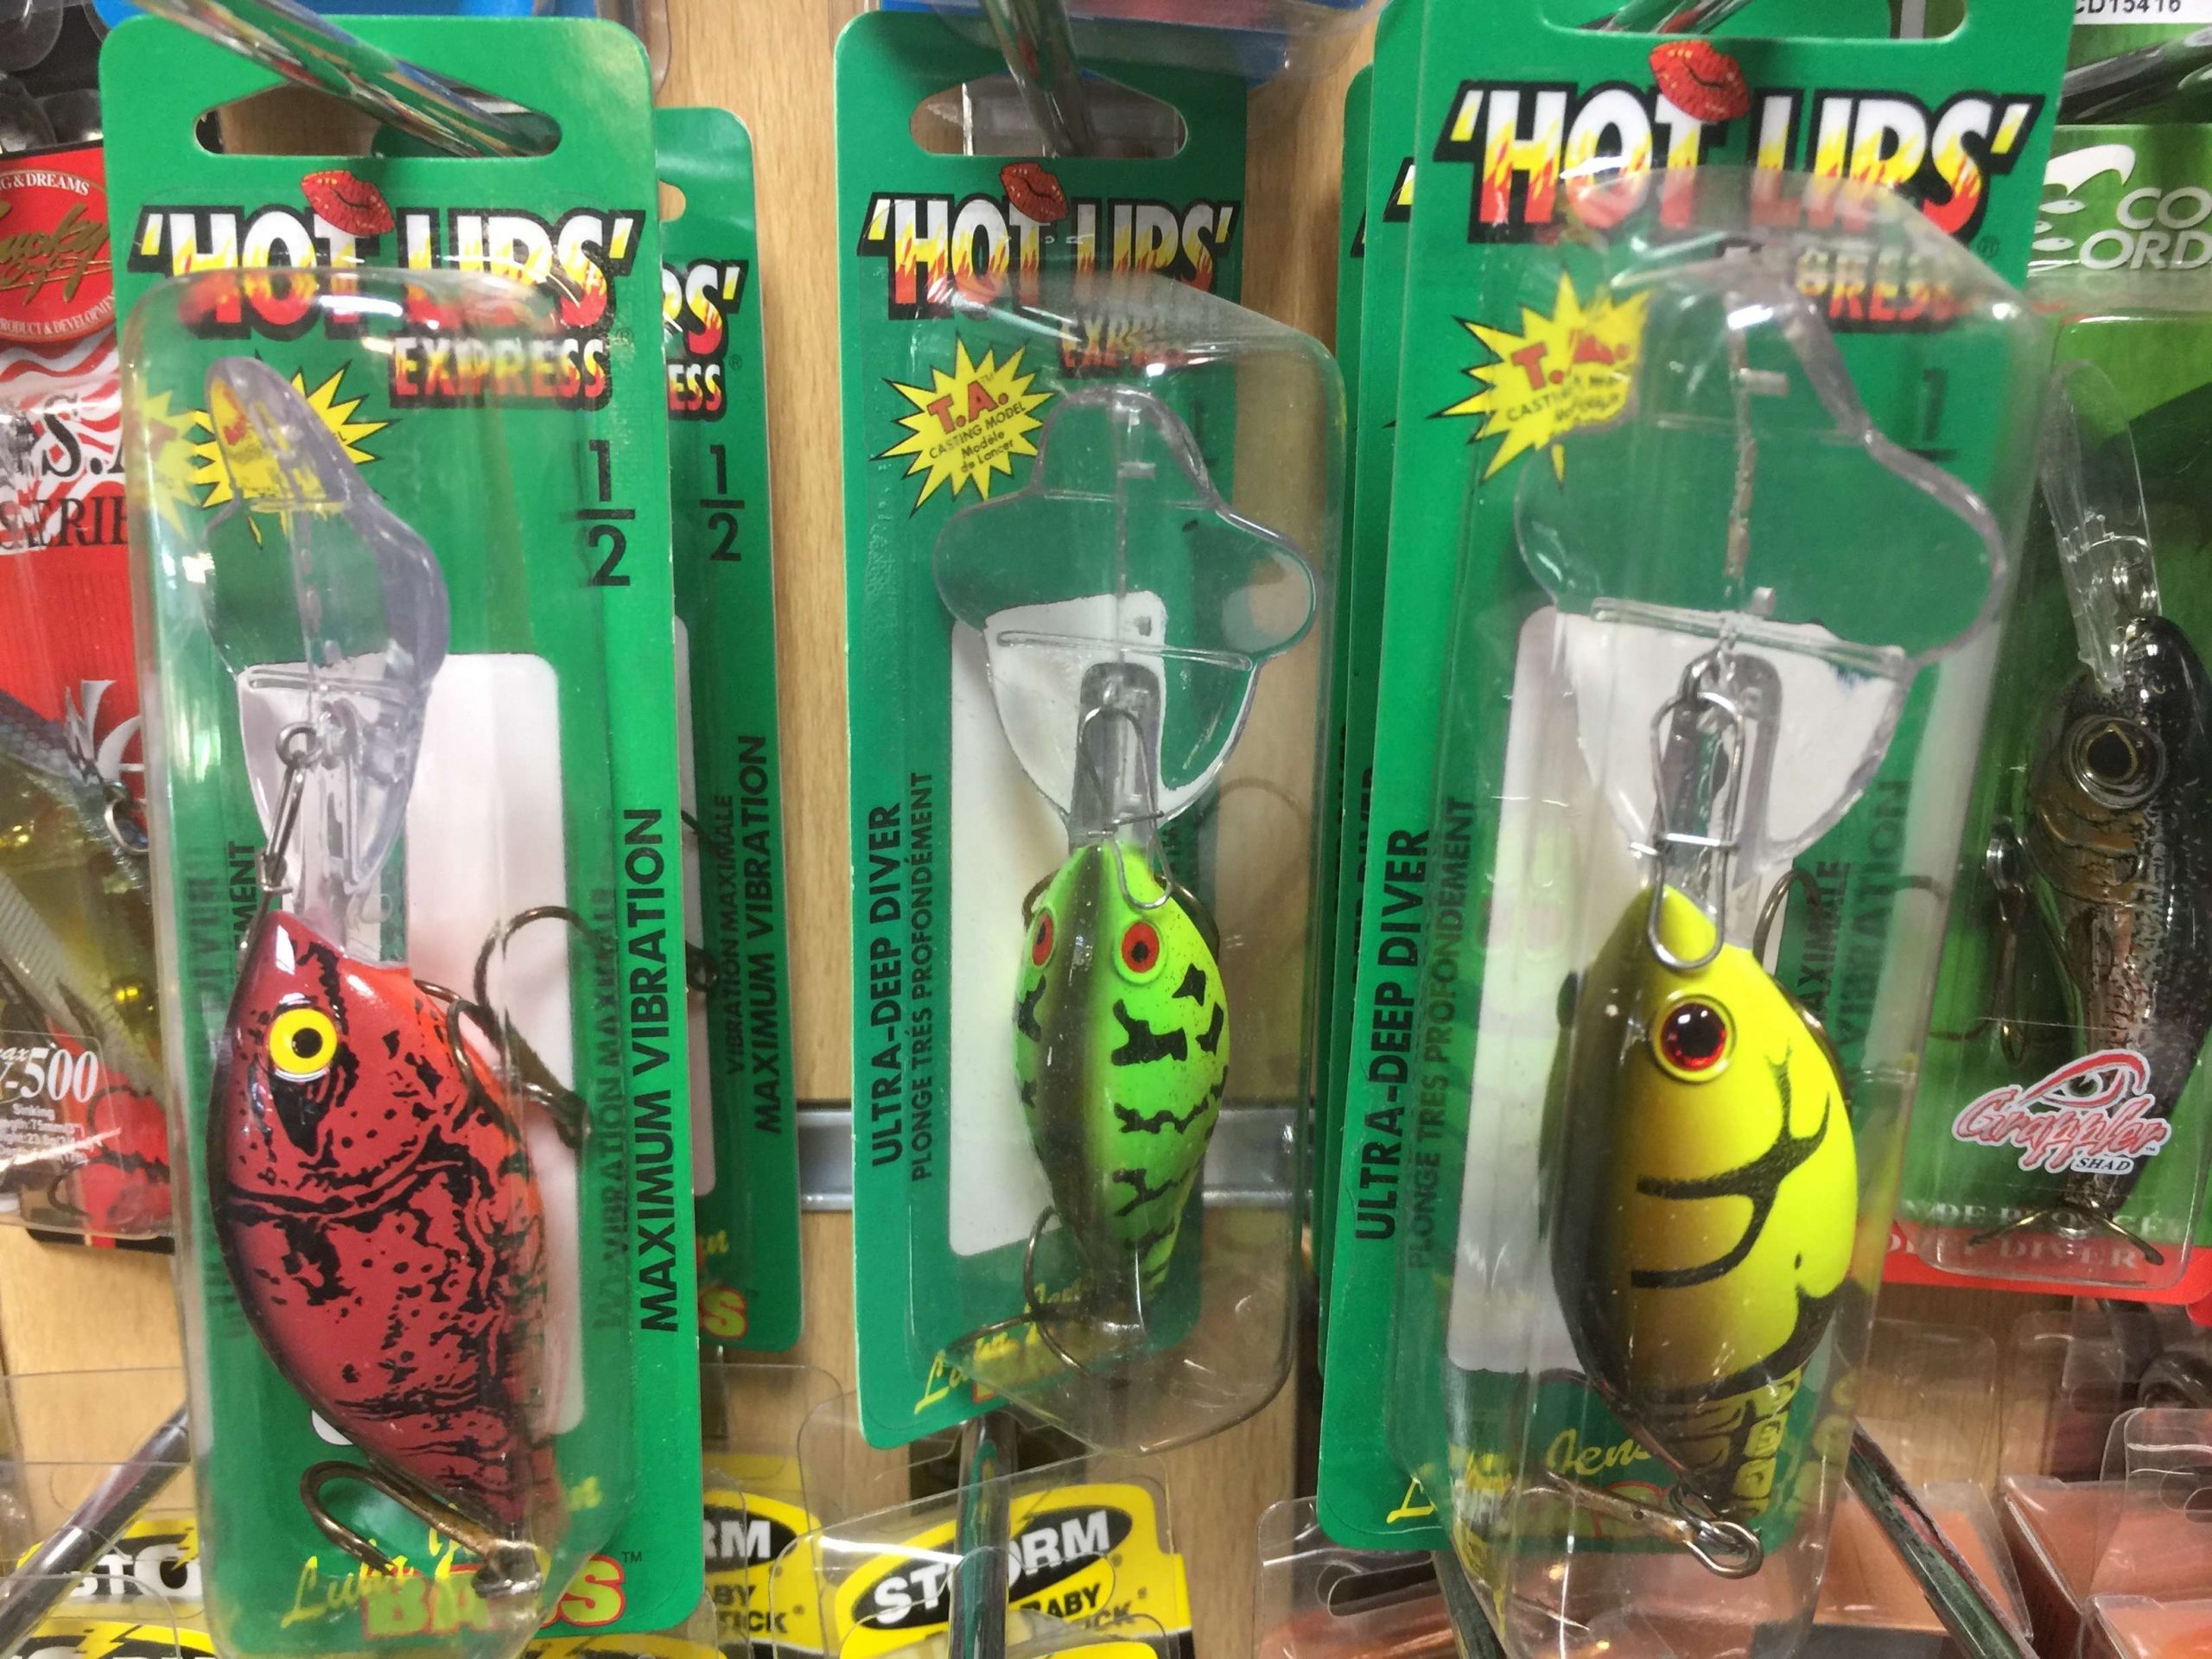 Hot Lips cranks are getting hard to find in the U.S. â¦ not so much in Caspe.